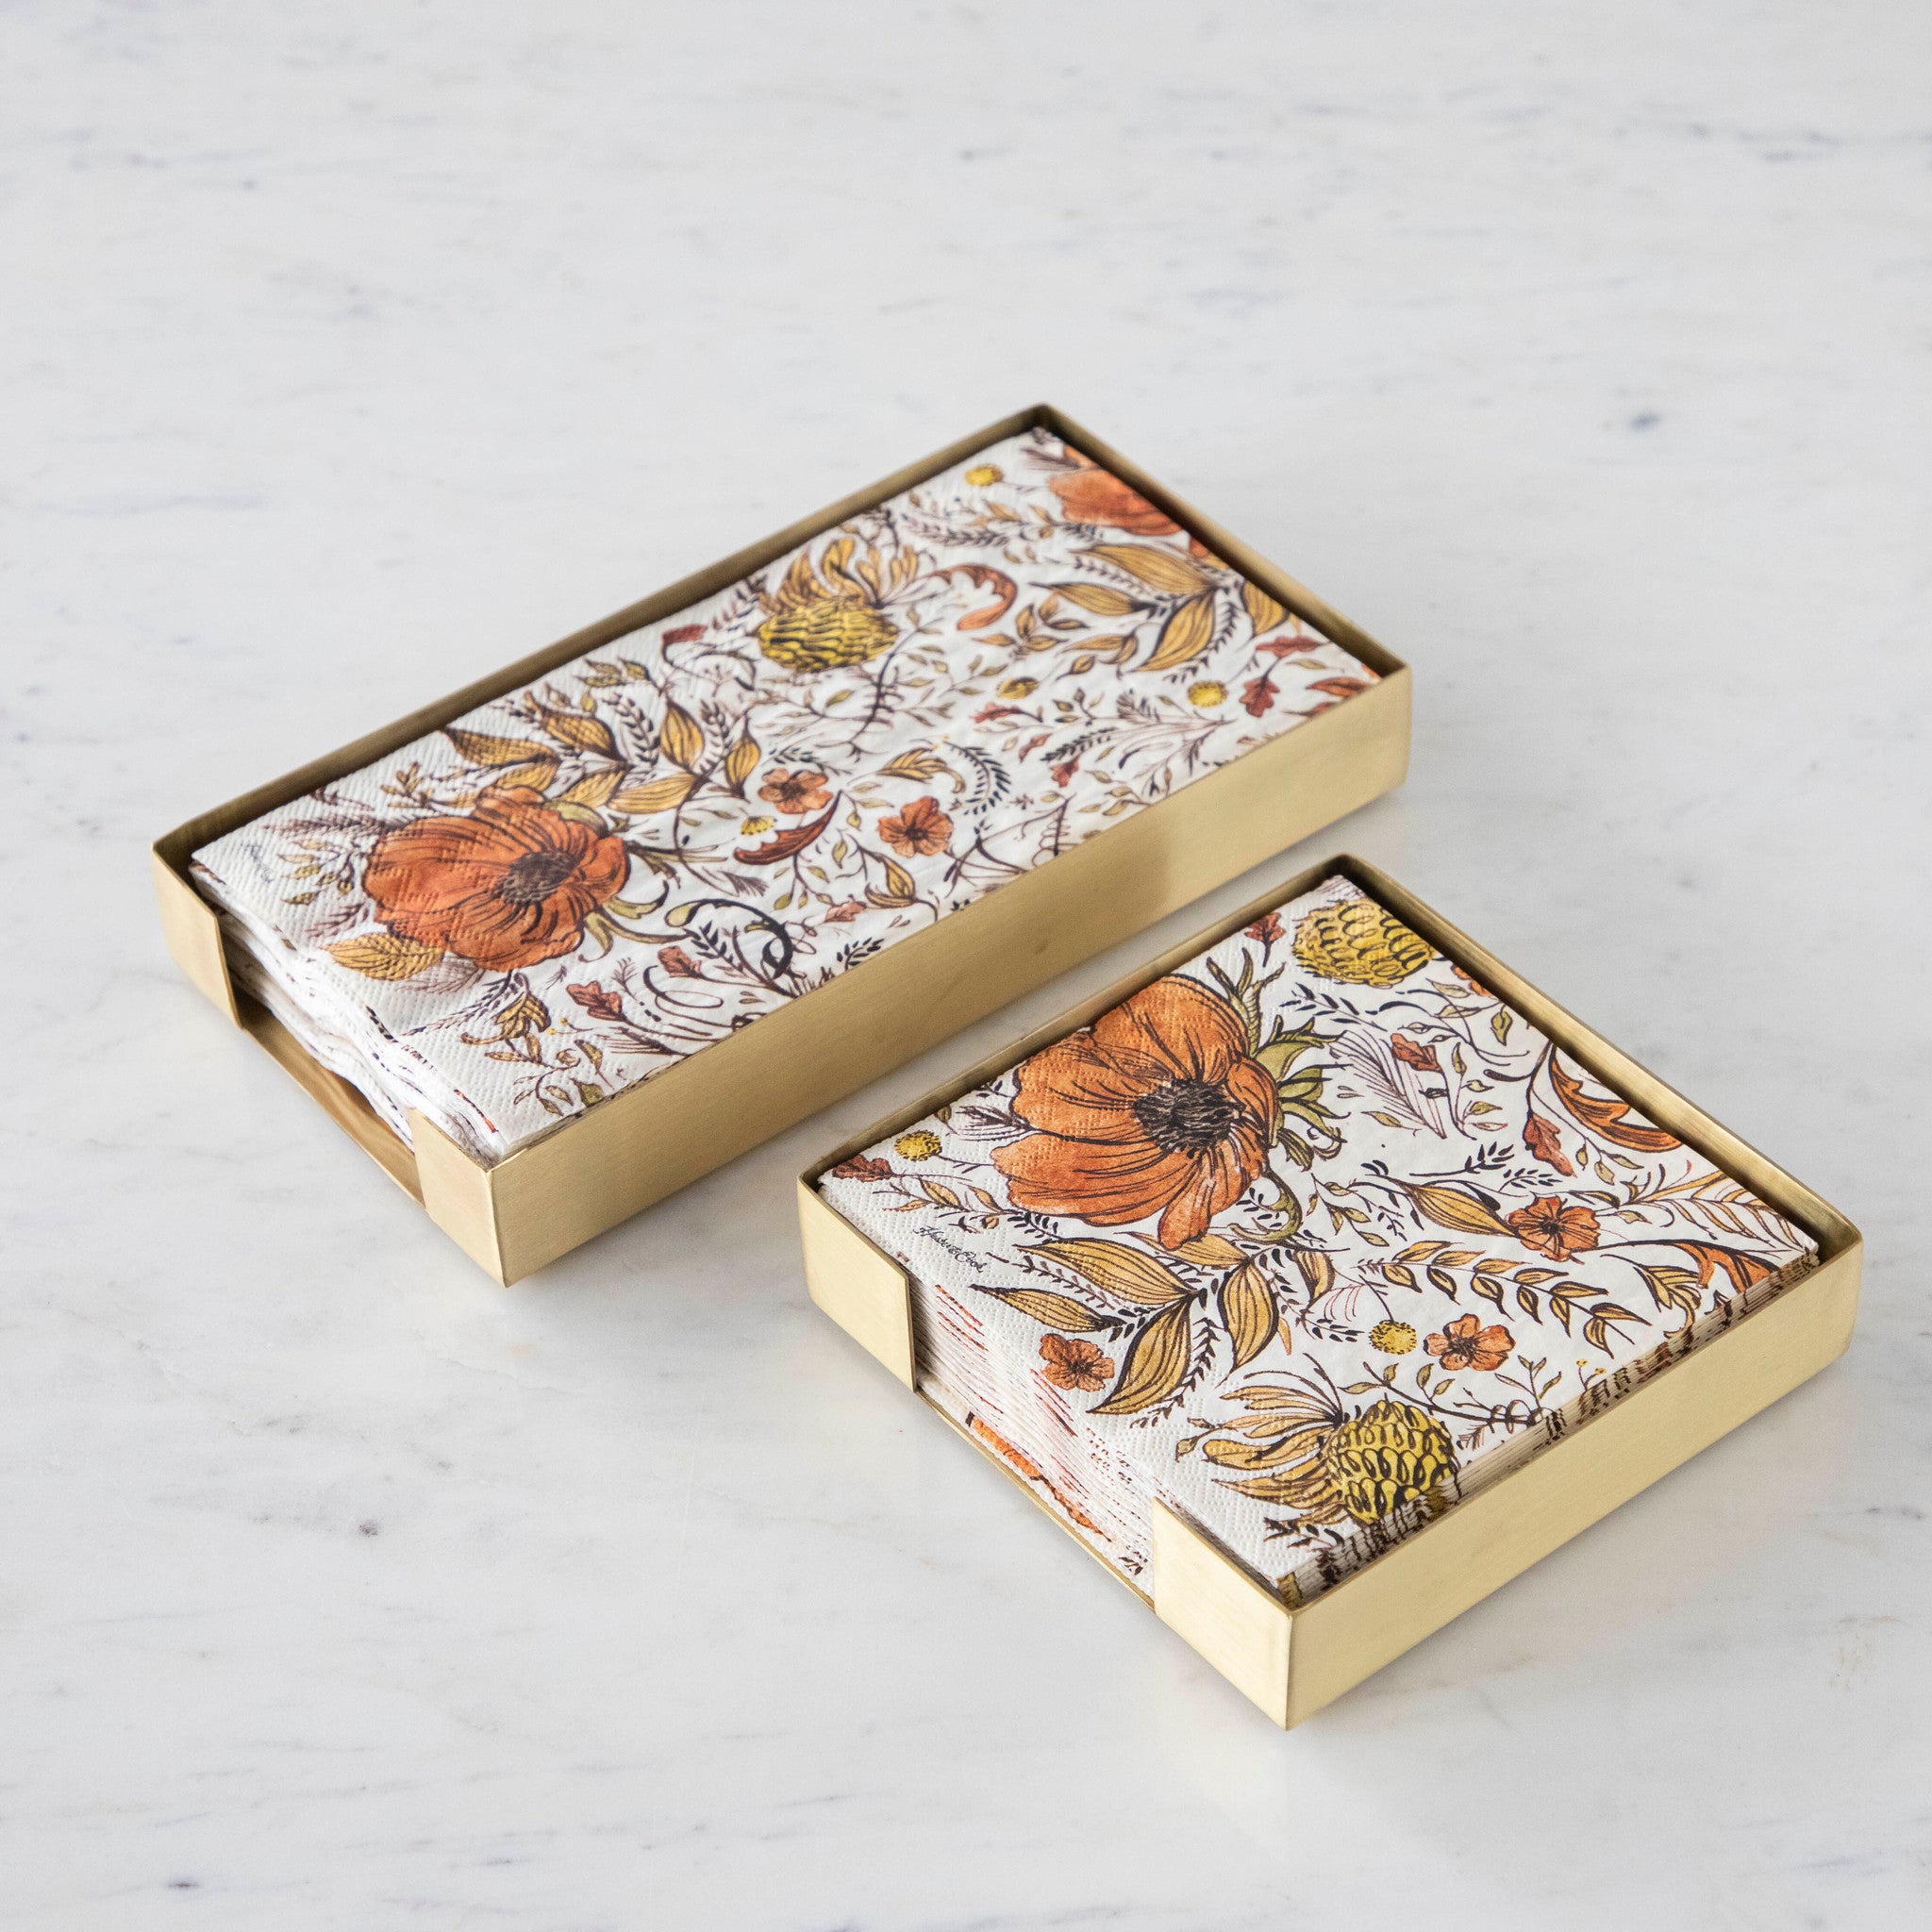 Two Brass Napkin Holders, guest-sized and cocktail-sized, containing autumnal napkins on a white table.